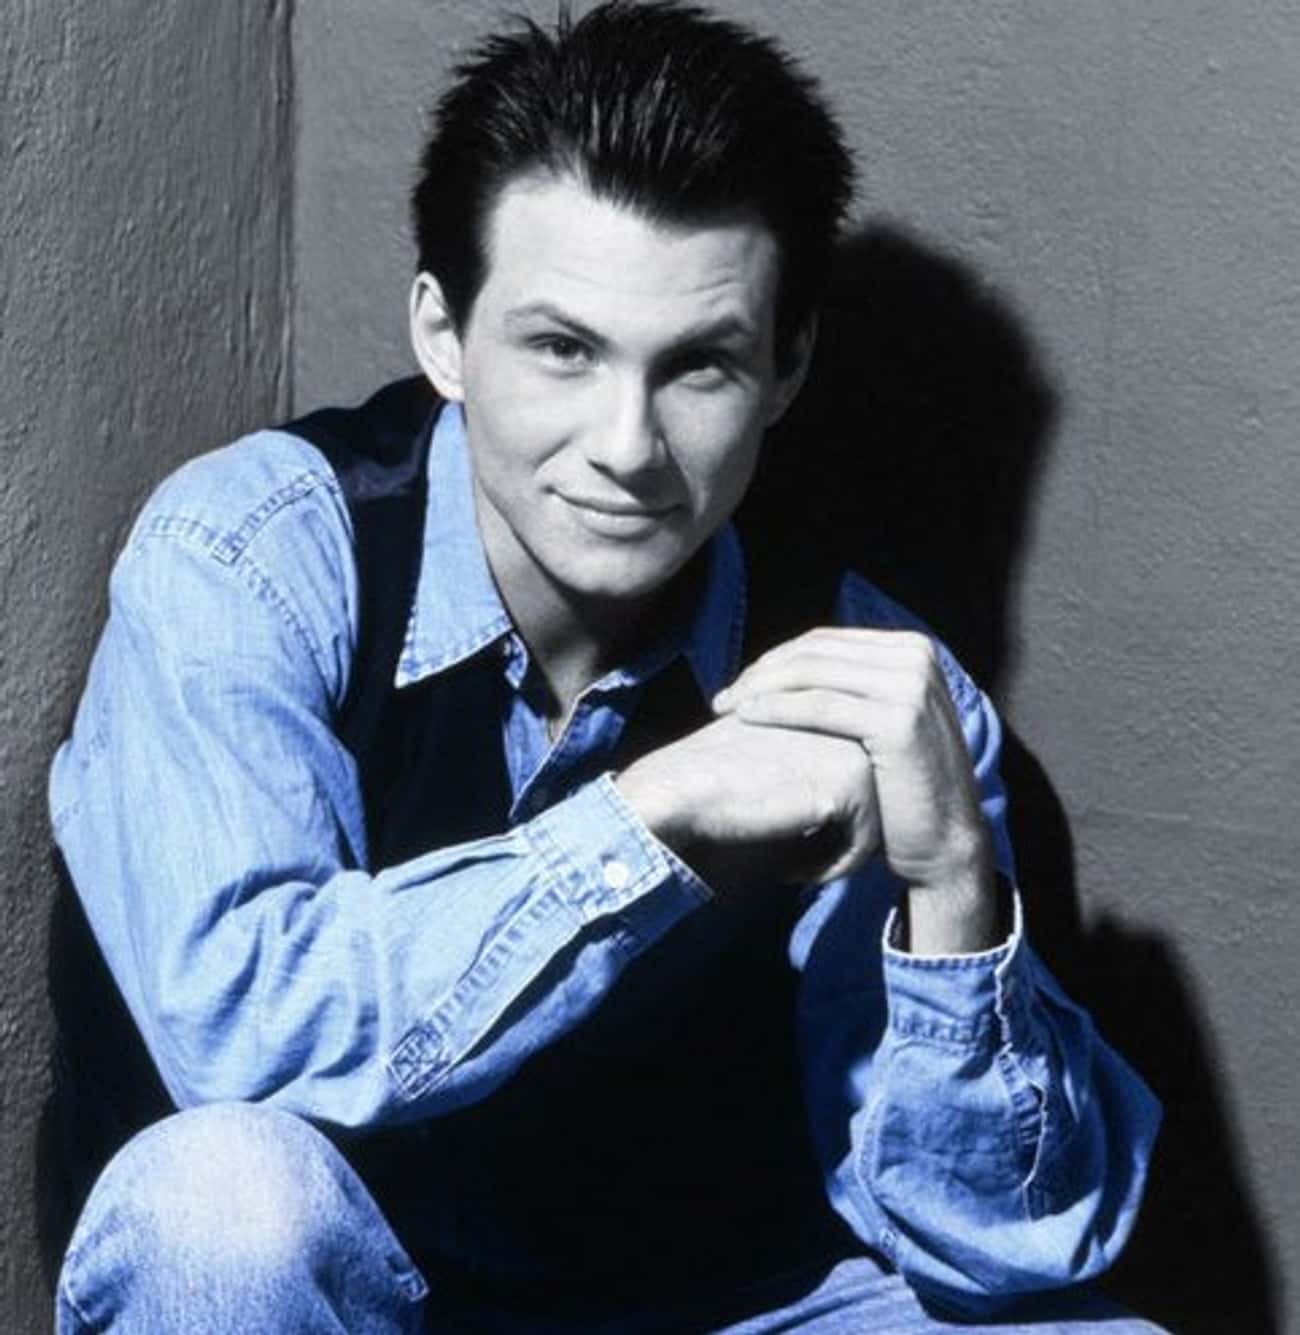 Young Christian Slater in Blue Jean Buttondown and Black Vest